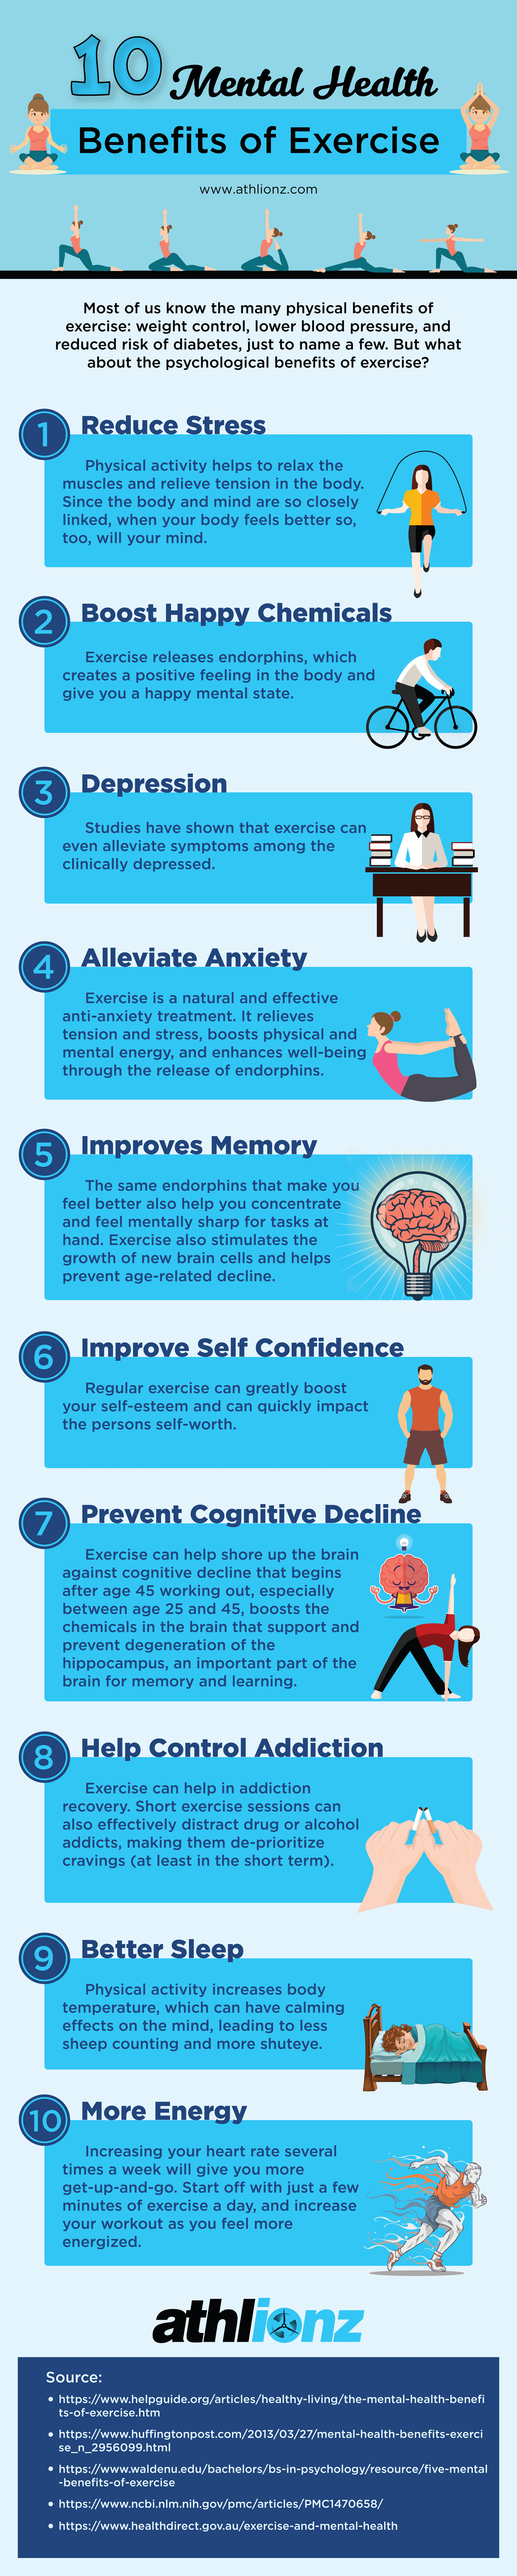 Mental-Benefits-of-Exercise-infographic-plaza